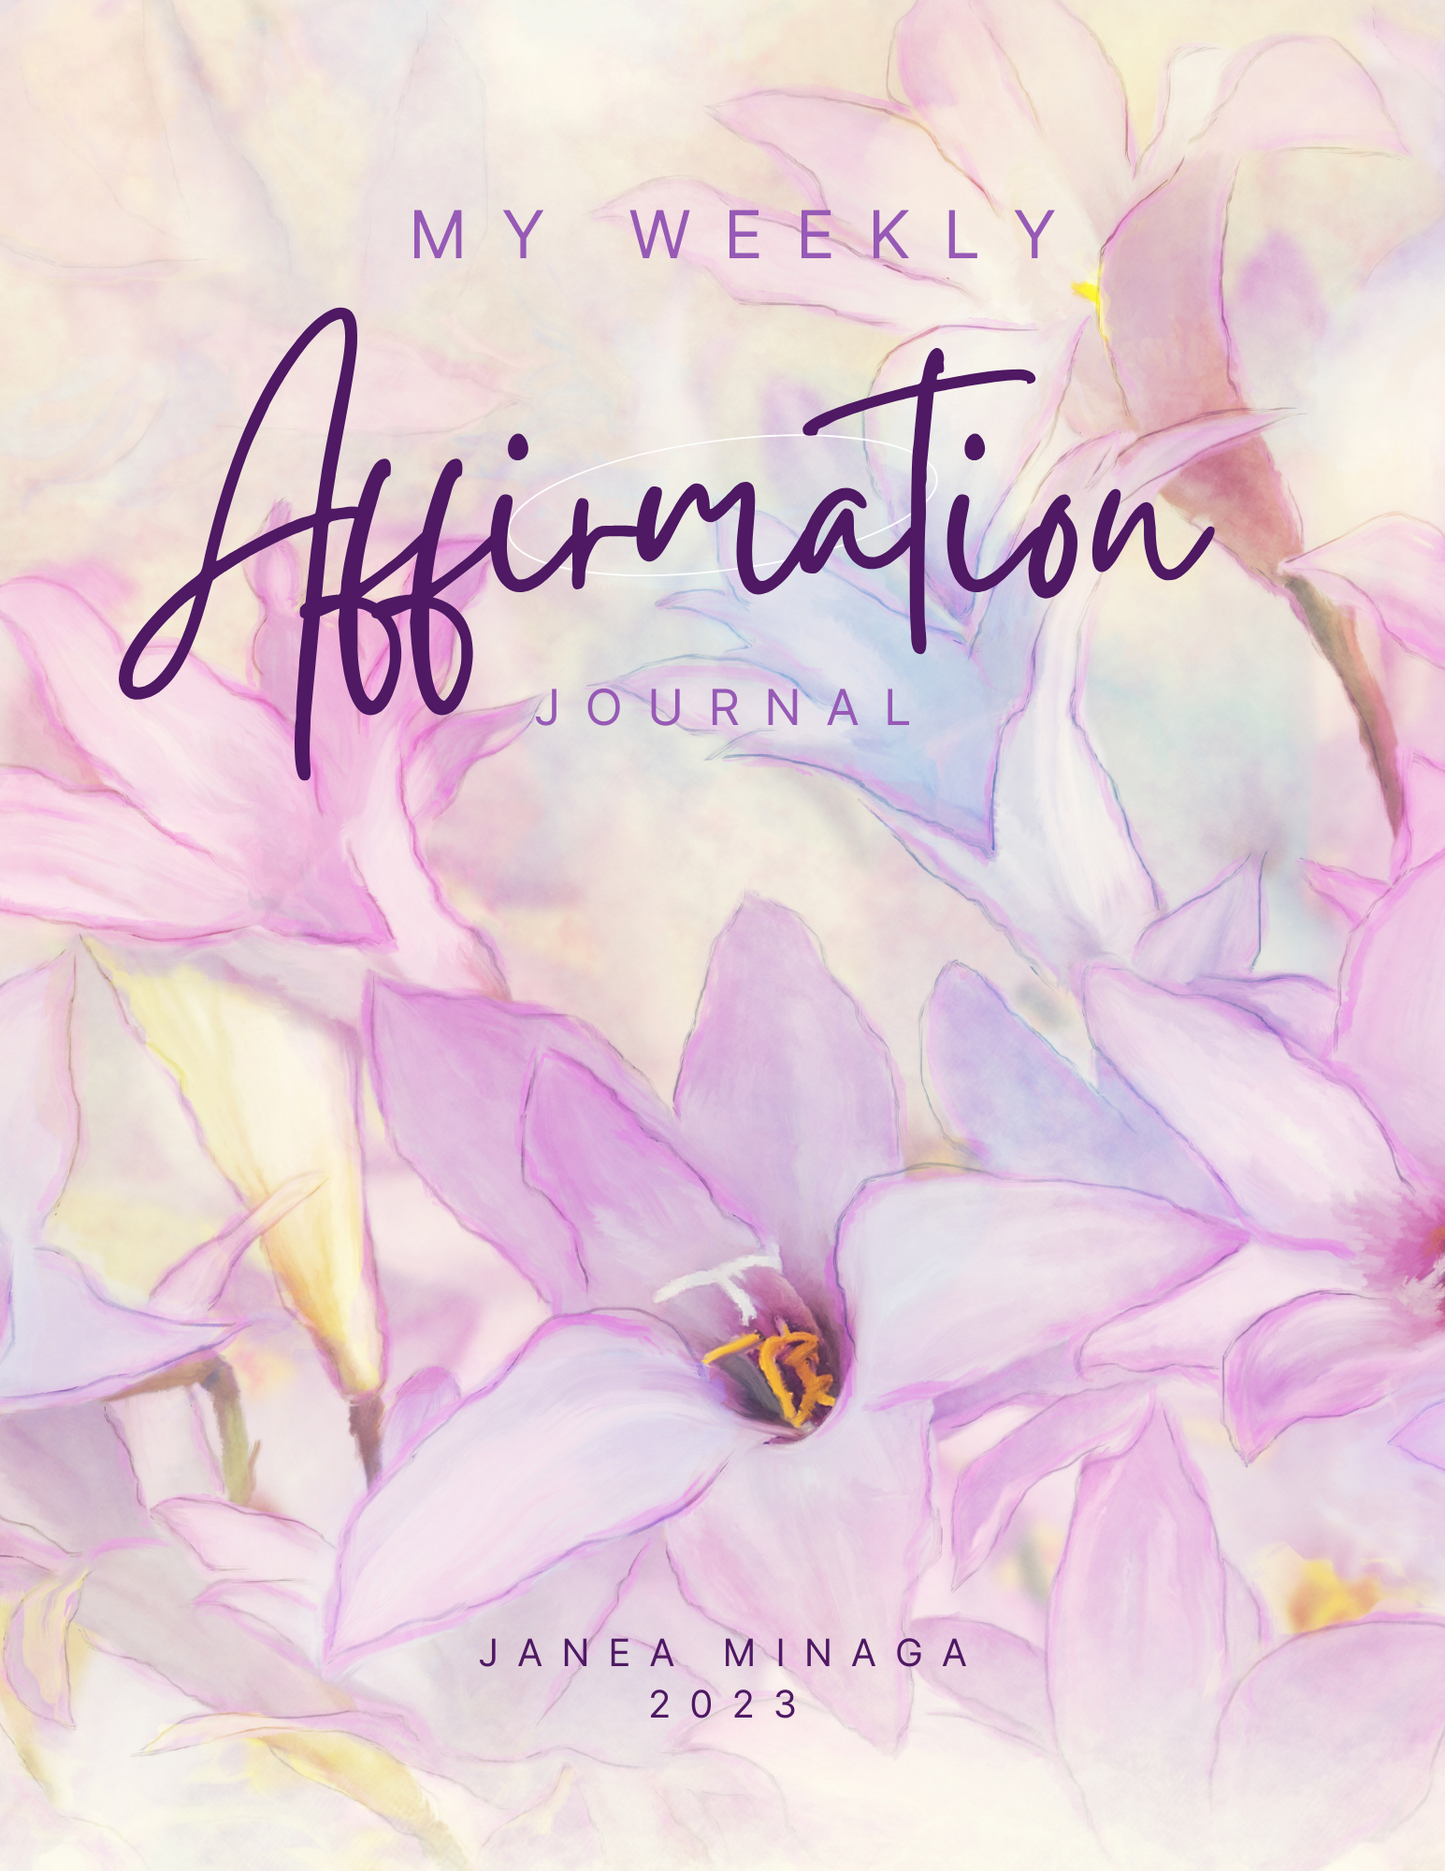 Weekly Affirmations journal